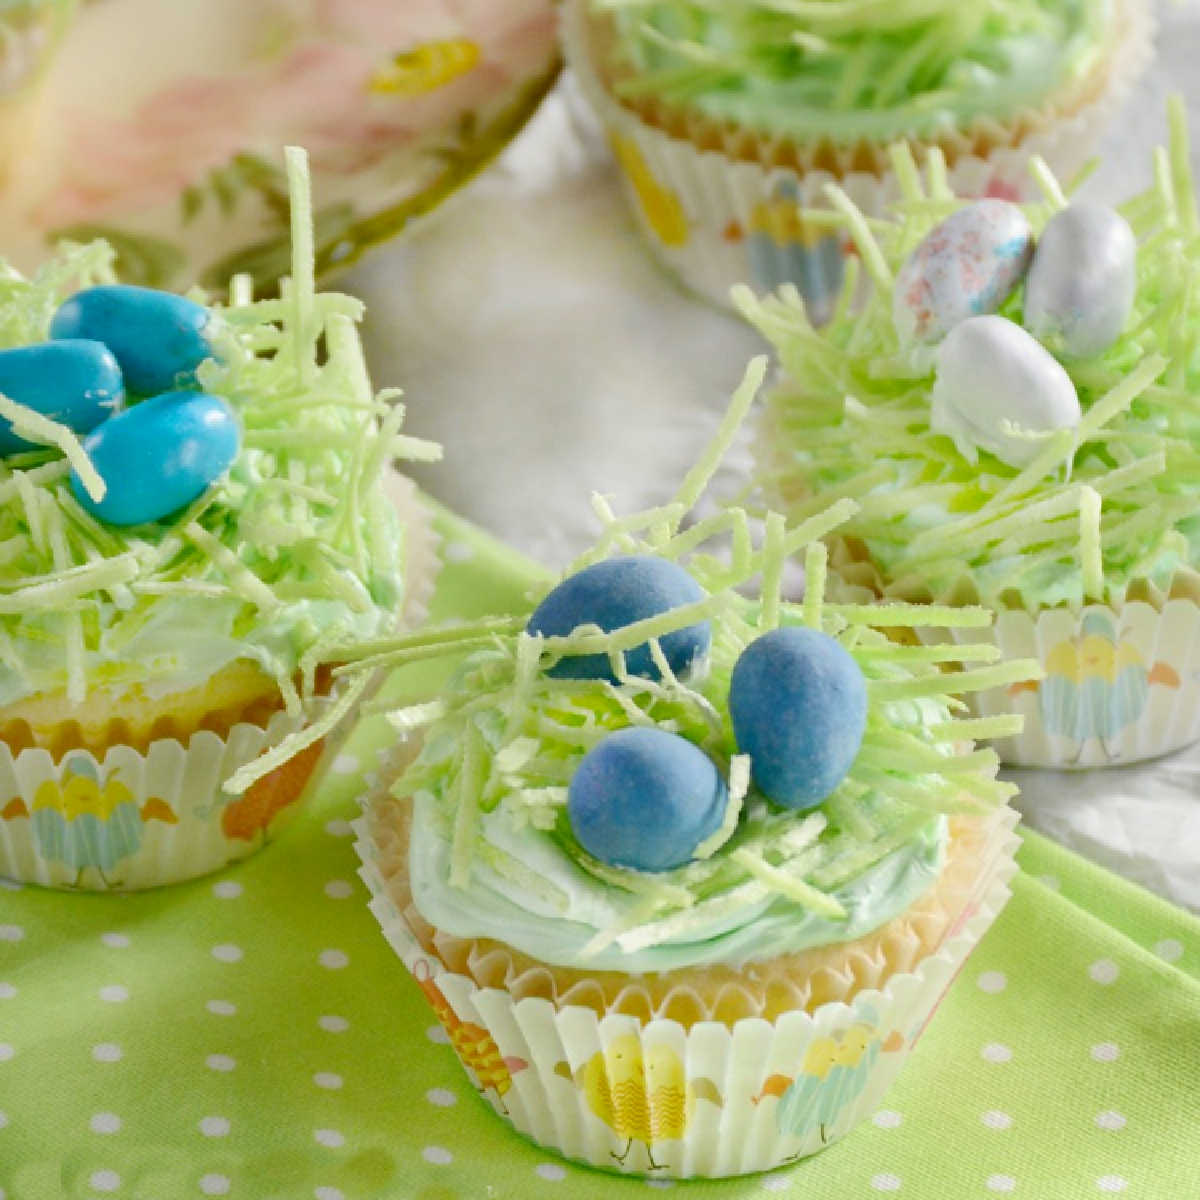 bird's nest Easter cupcakes with edible grass and mini eggs